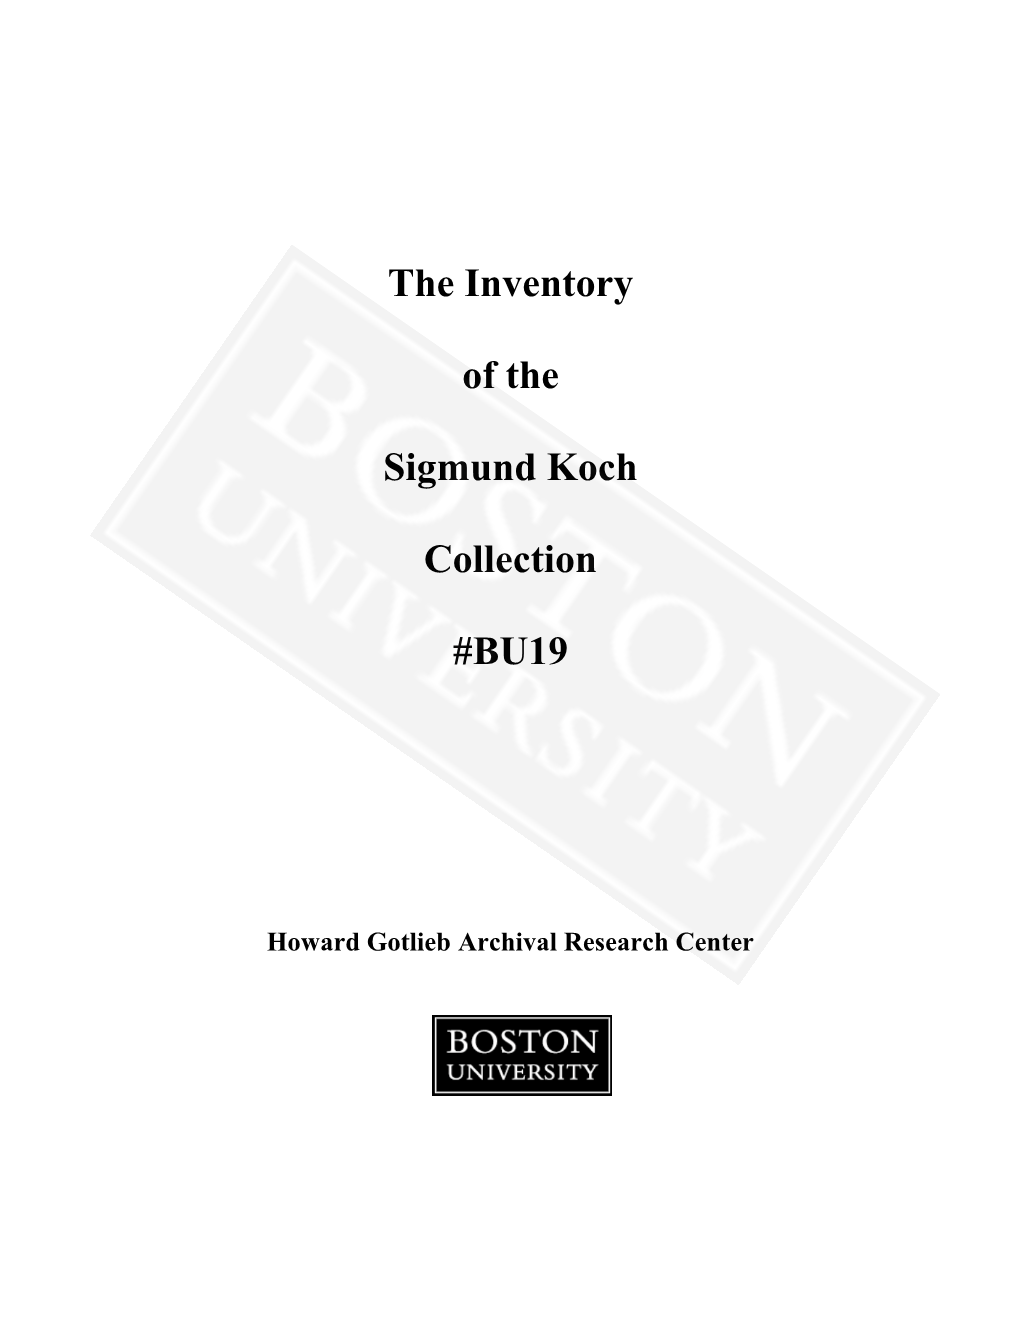 The Inventory of the Sigmund Koch Collection #BU19